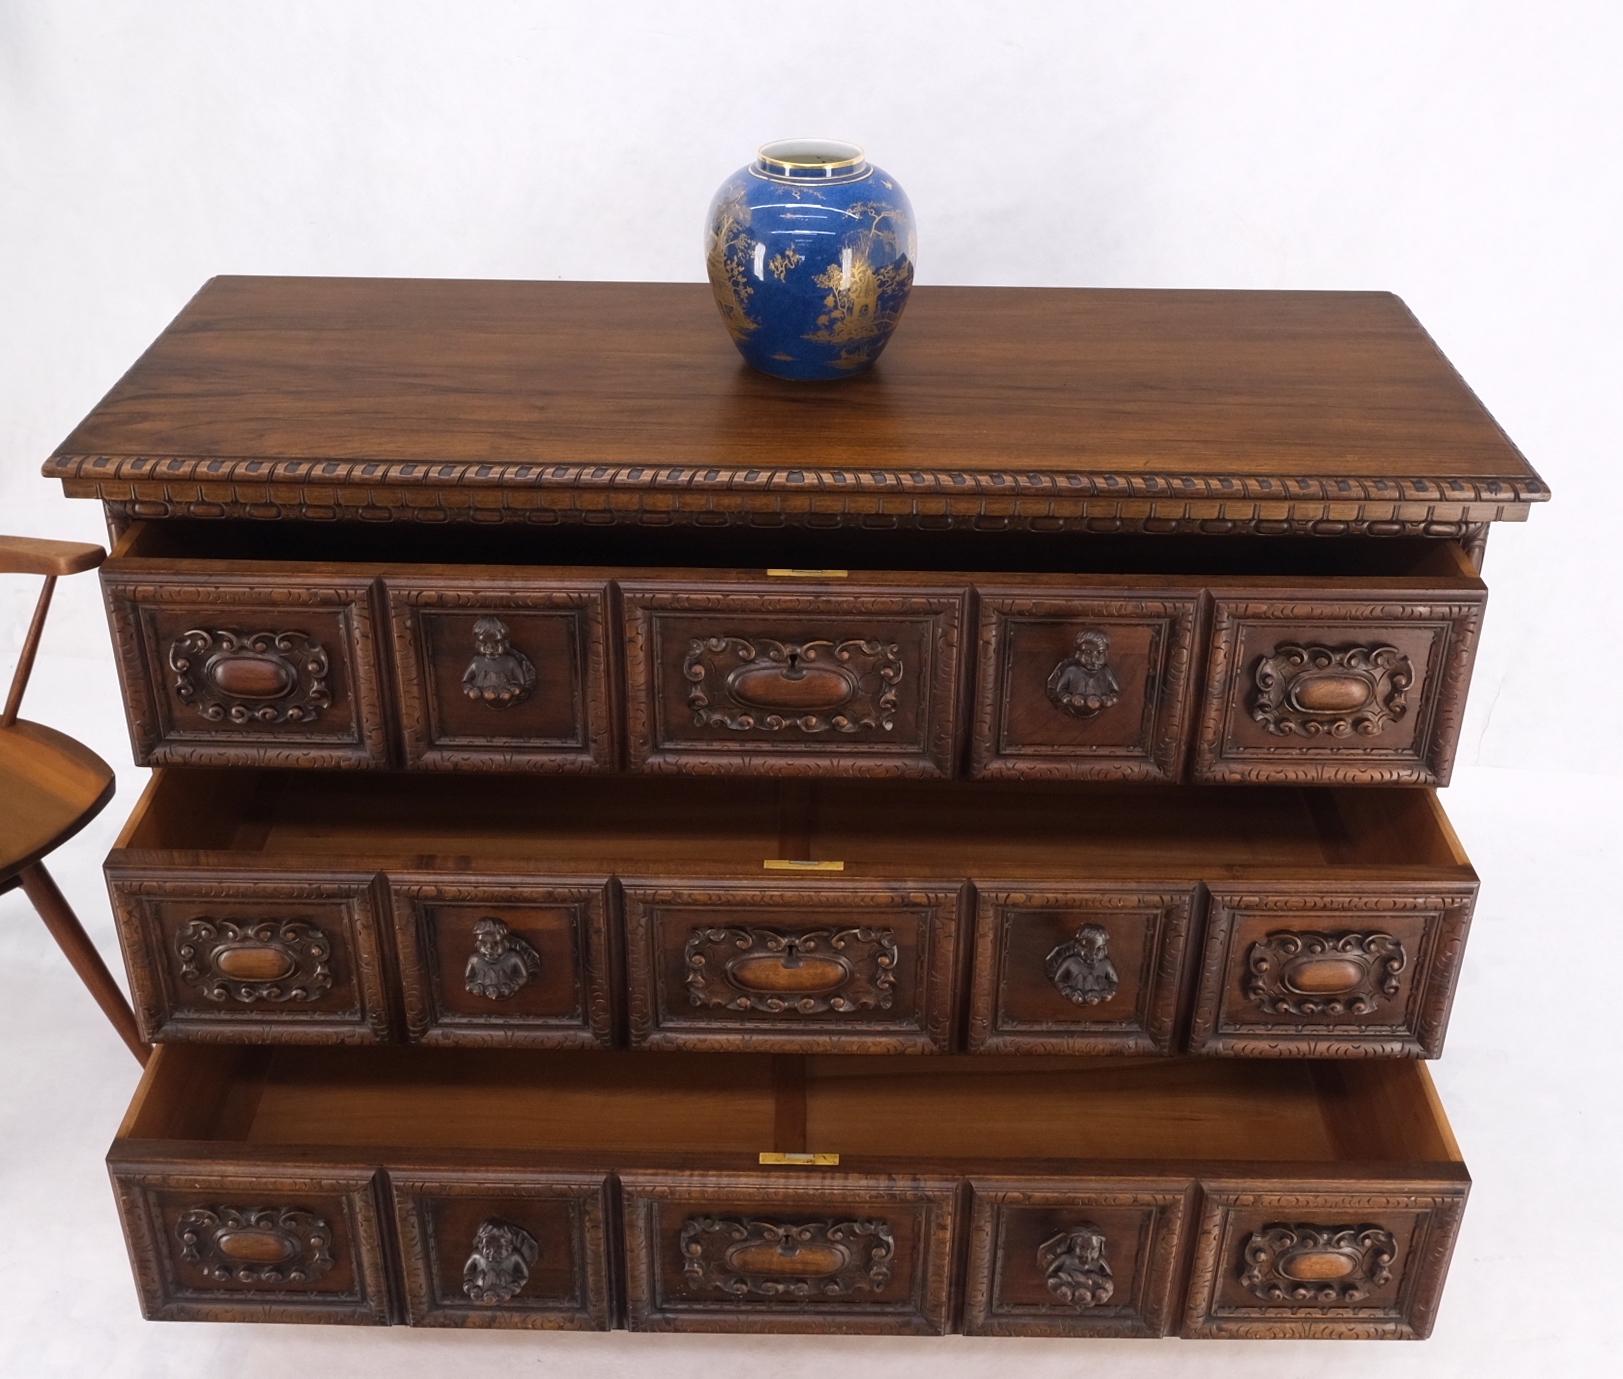 3 Dovetail Drawers Heavily Carved Wooden Pulls Rope Edge Bachelor Chest Dresser For Sale 9